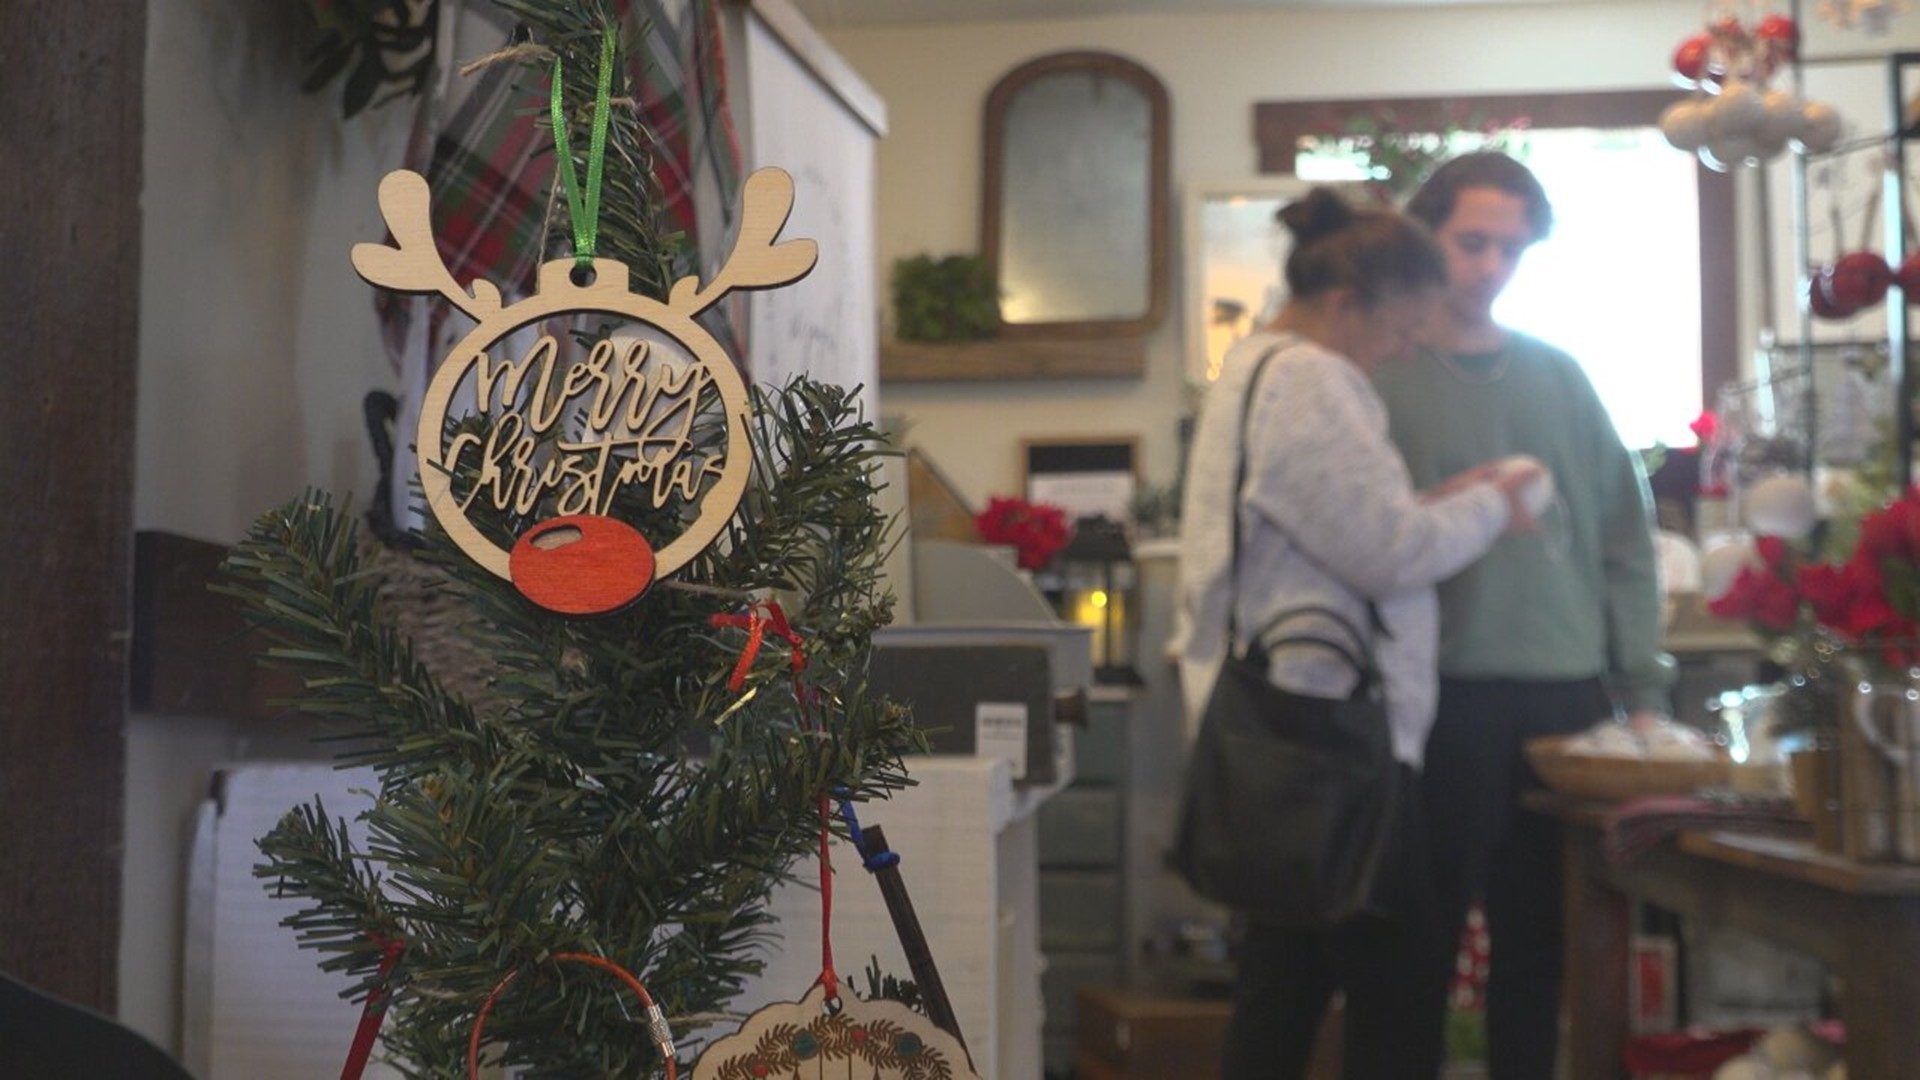 Lancaster County’s Best Kept Secrets Twelve Shops of Christmas Tour gives people a unique holiday shopping experience while supporting local businesses.